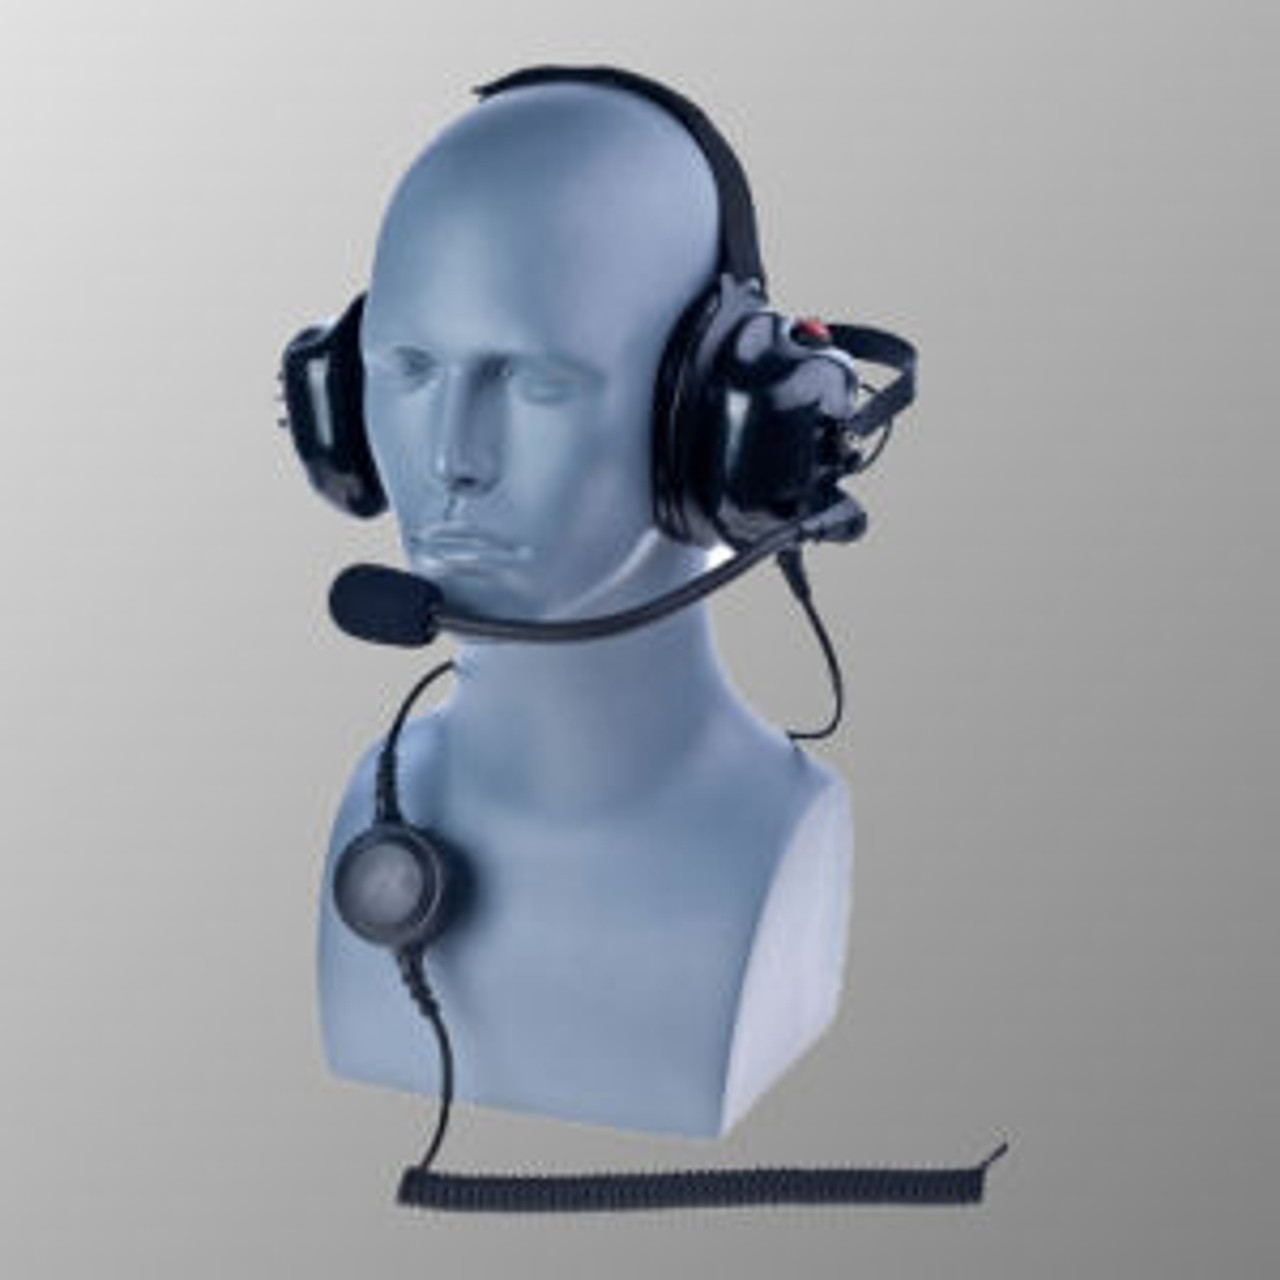 EF Johnson 51TL ES Noise Canceling Behind The Head Double Muff Headset